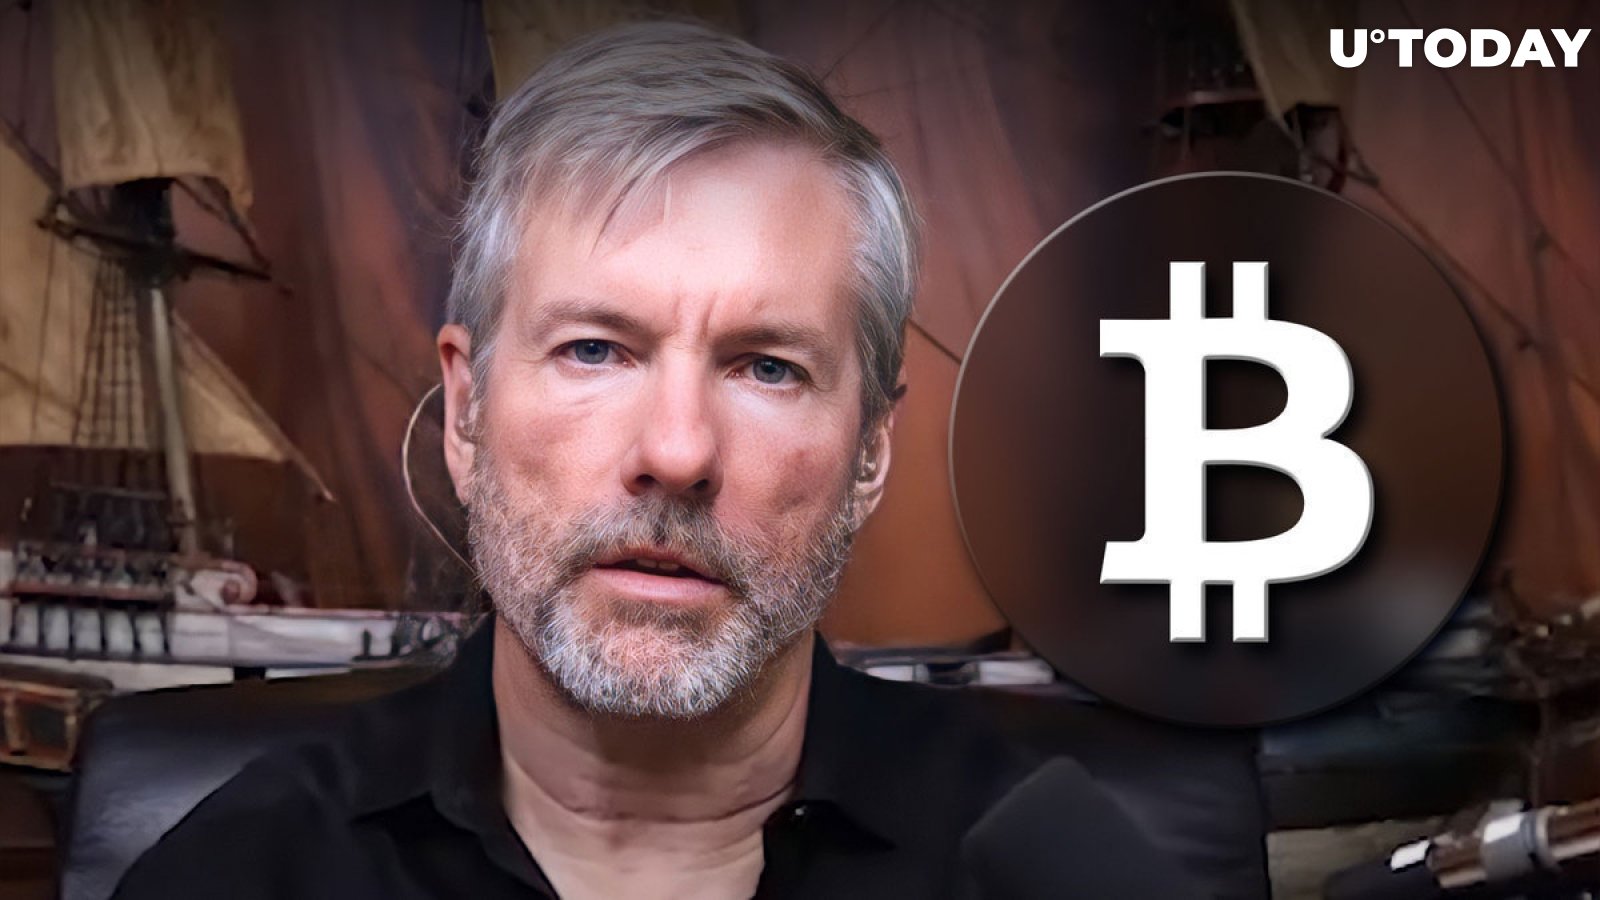 Bitcoiner Michael Saylor Sparks Heated Discussion with 'Anti-Bear' BTC Tweet